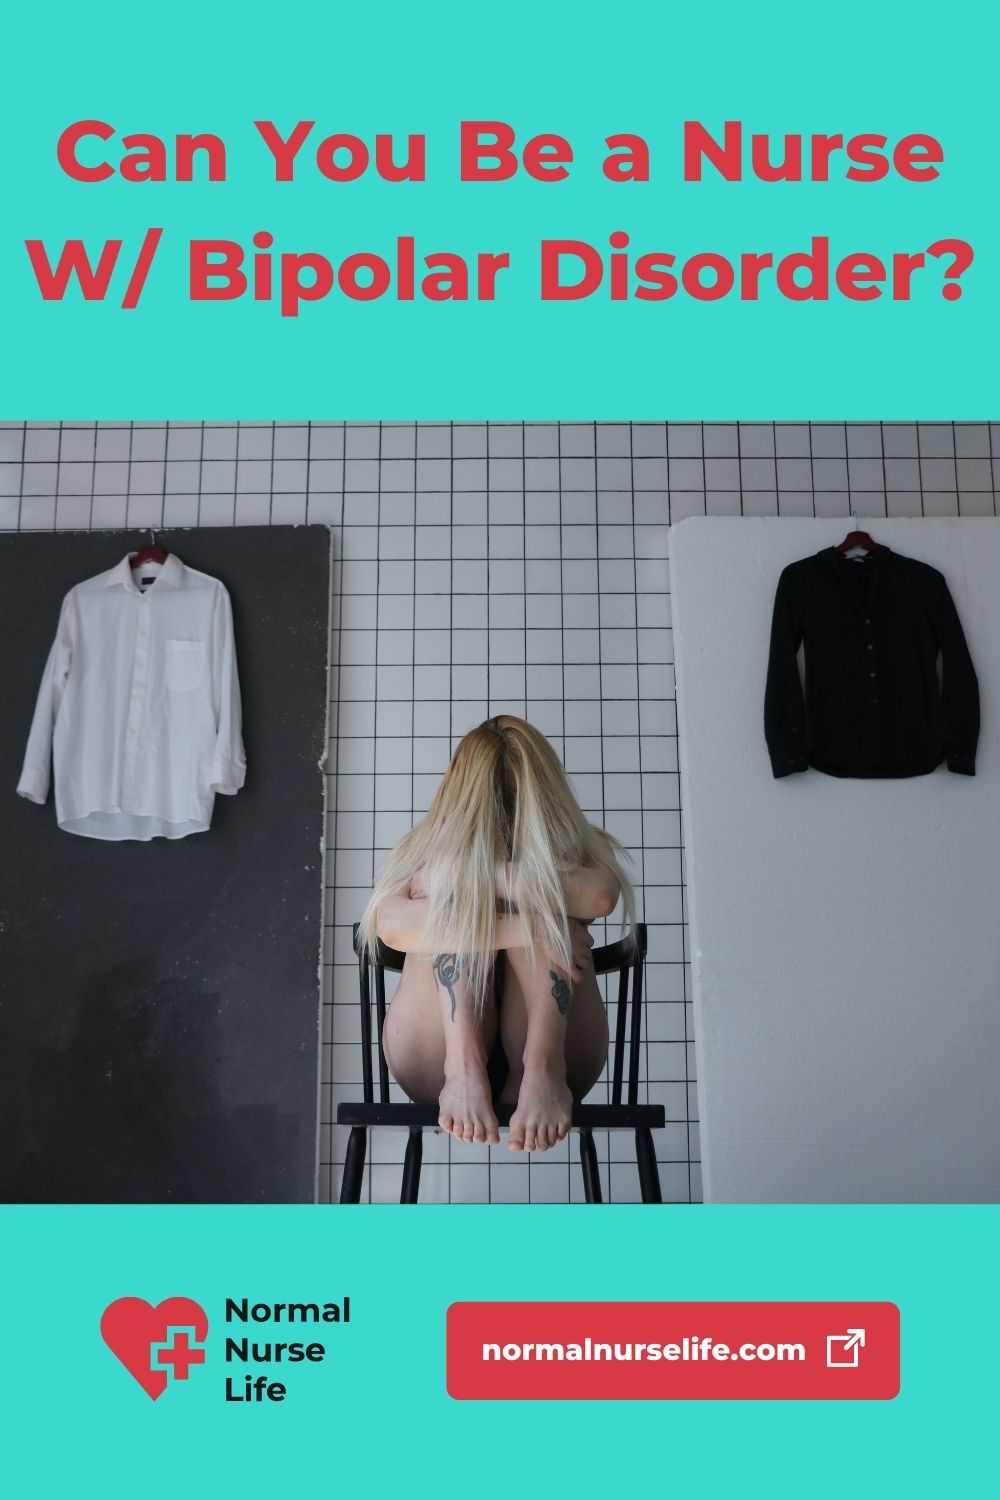 Can you be a nurse if you have bipolar disorder